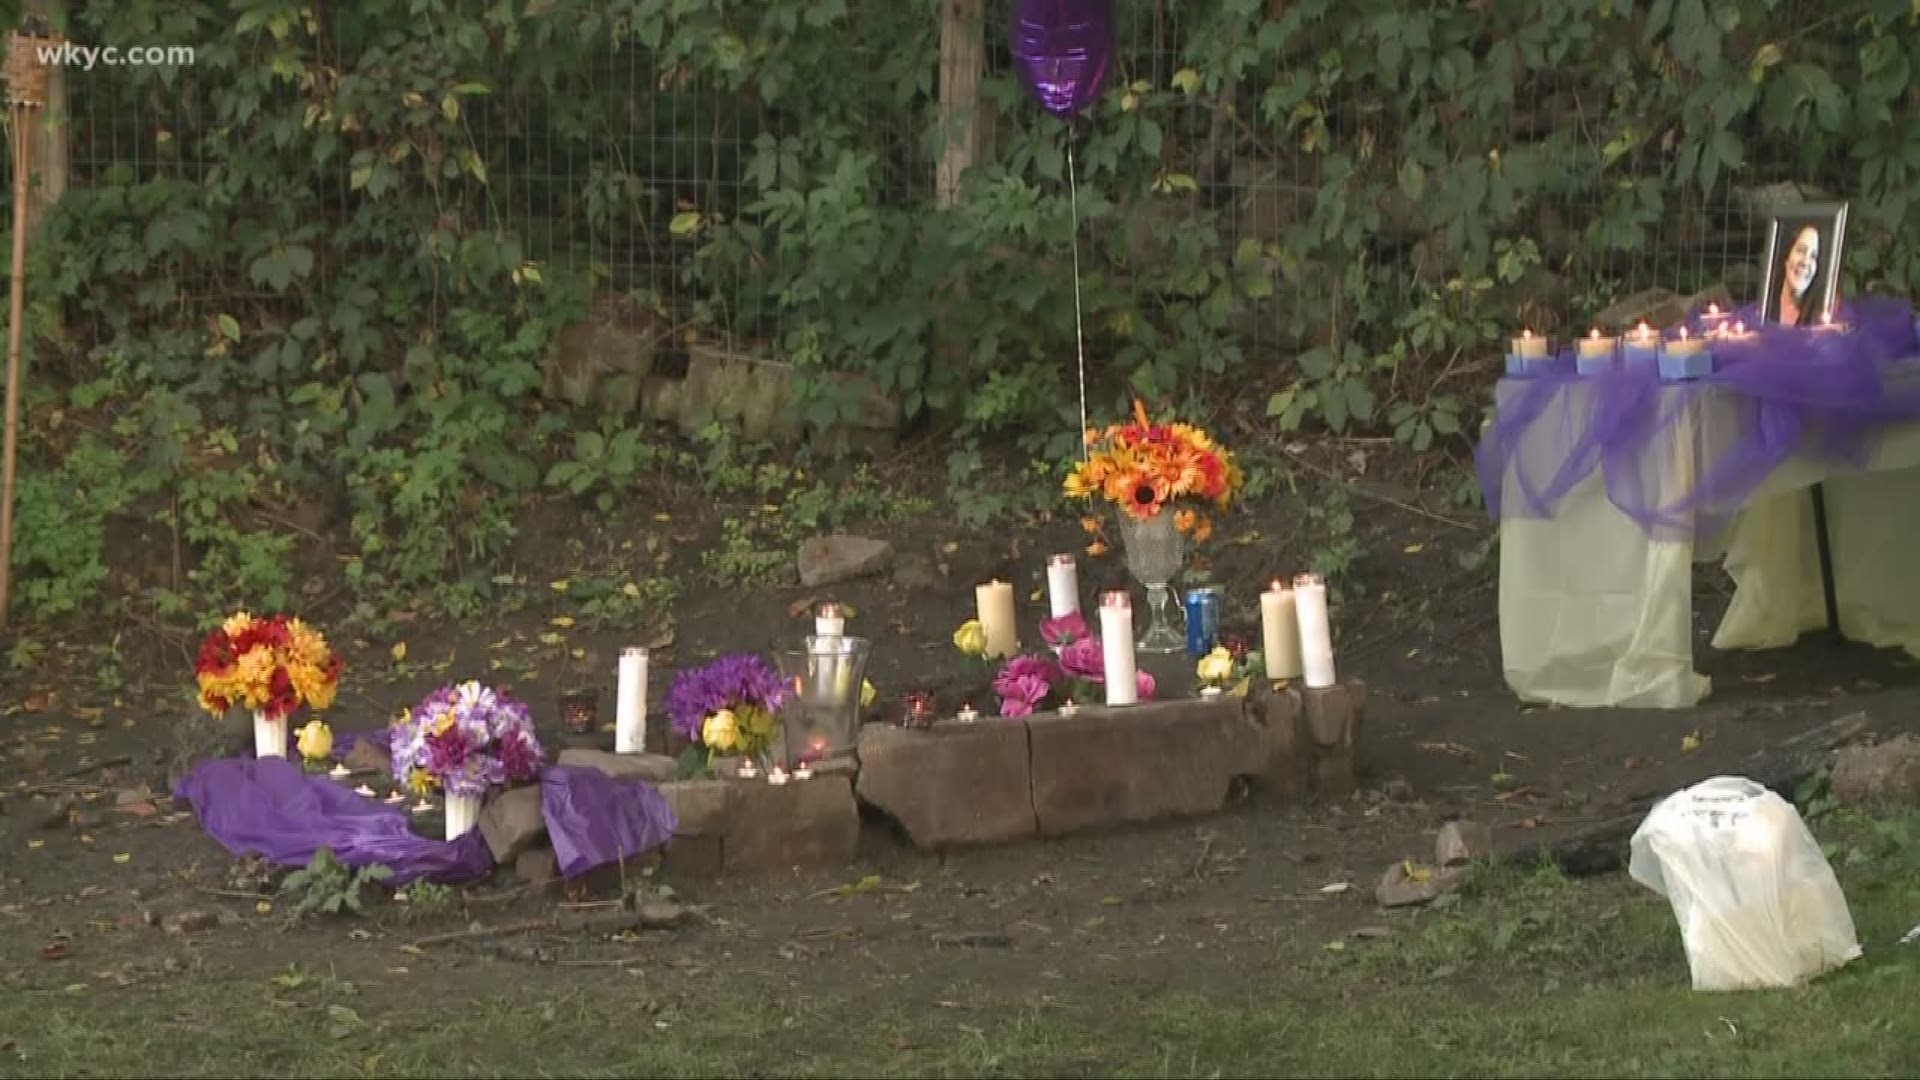 Vigil held for Akron woman after body found in shallow grave